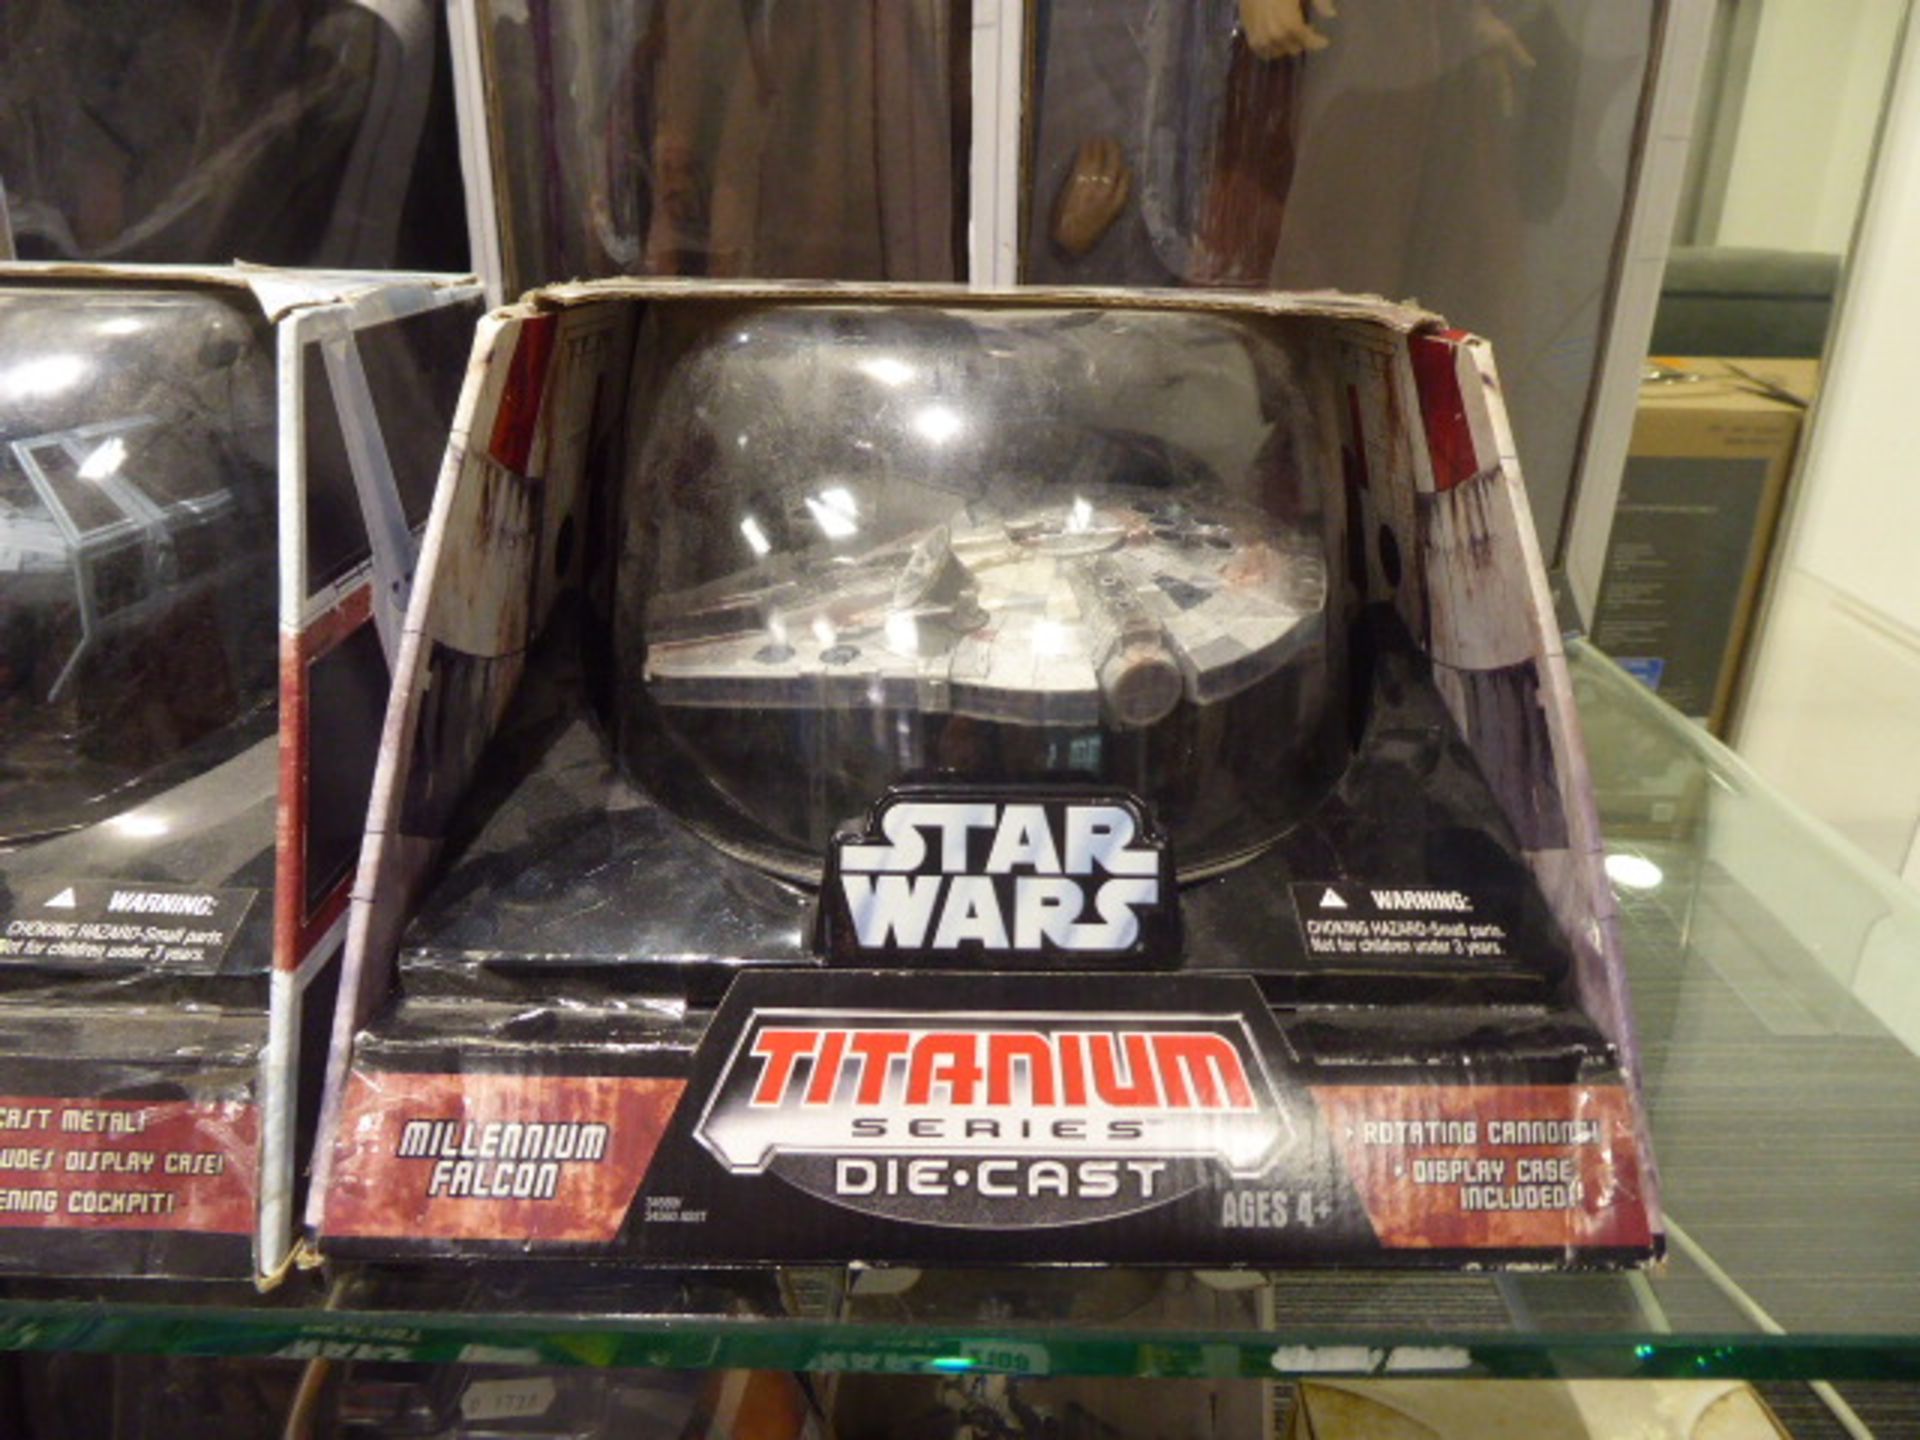 Titanium diecast series Star Wars vehicles to include Slave I, Darth Vader's Tie Advanced Star - Image 4 of 4